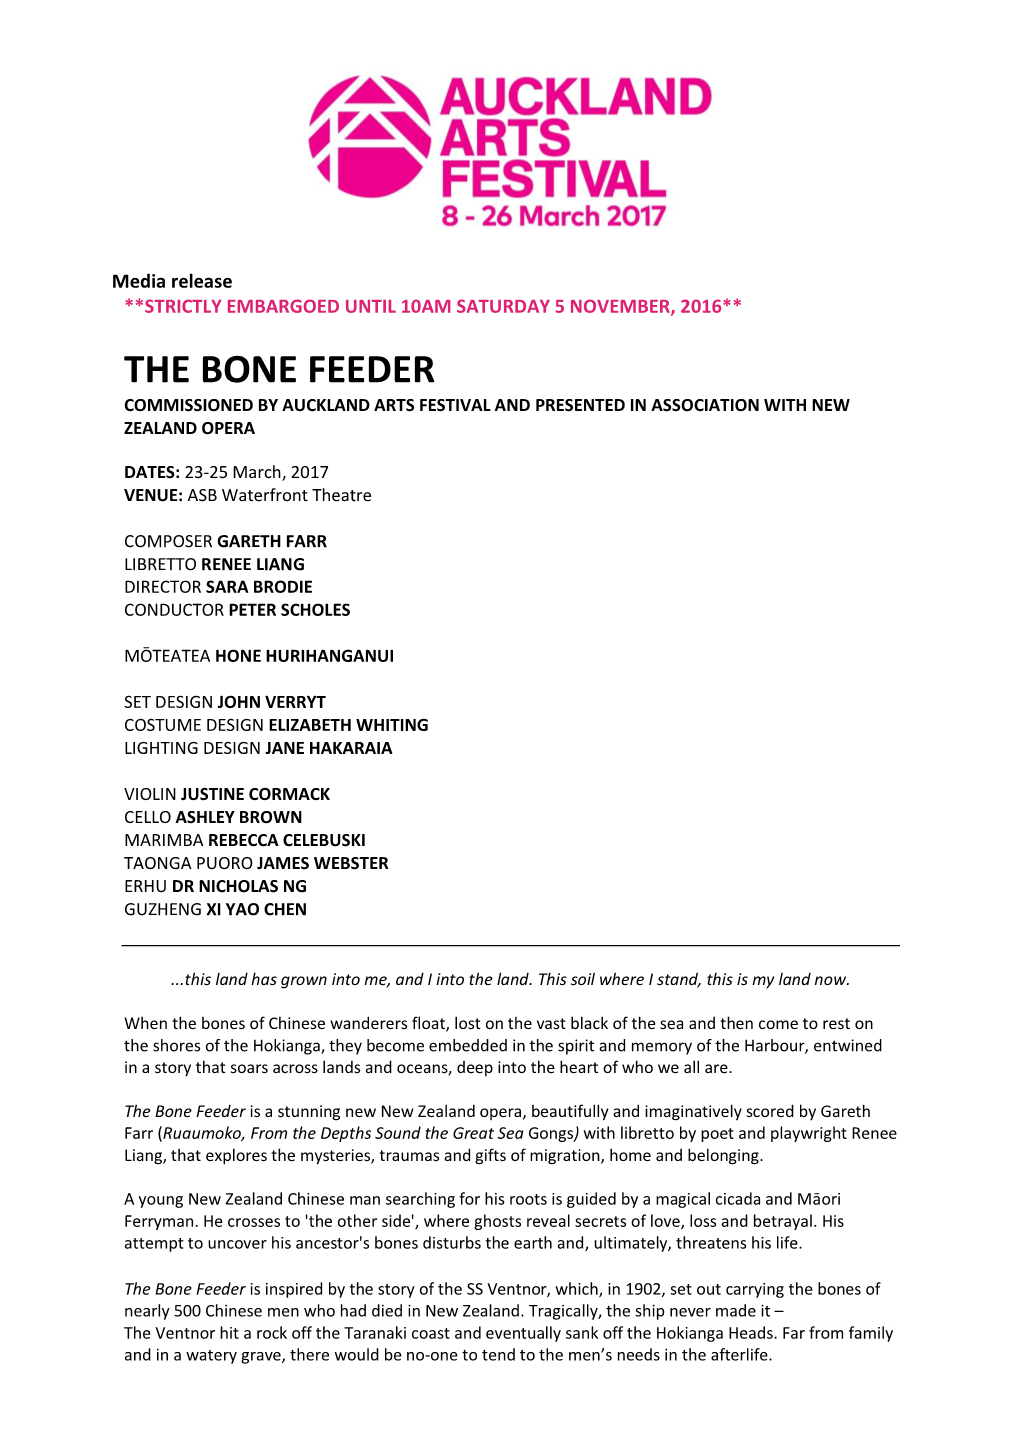 The Bone Feeder Commissioned by Auckland Arts Festival and Presented in Association with New Zealand Opera